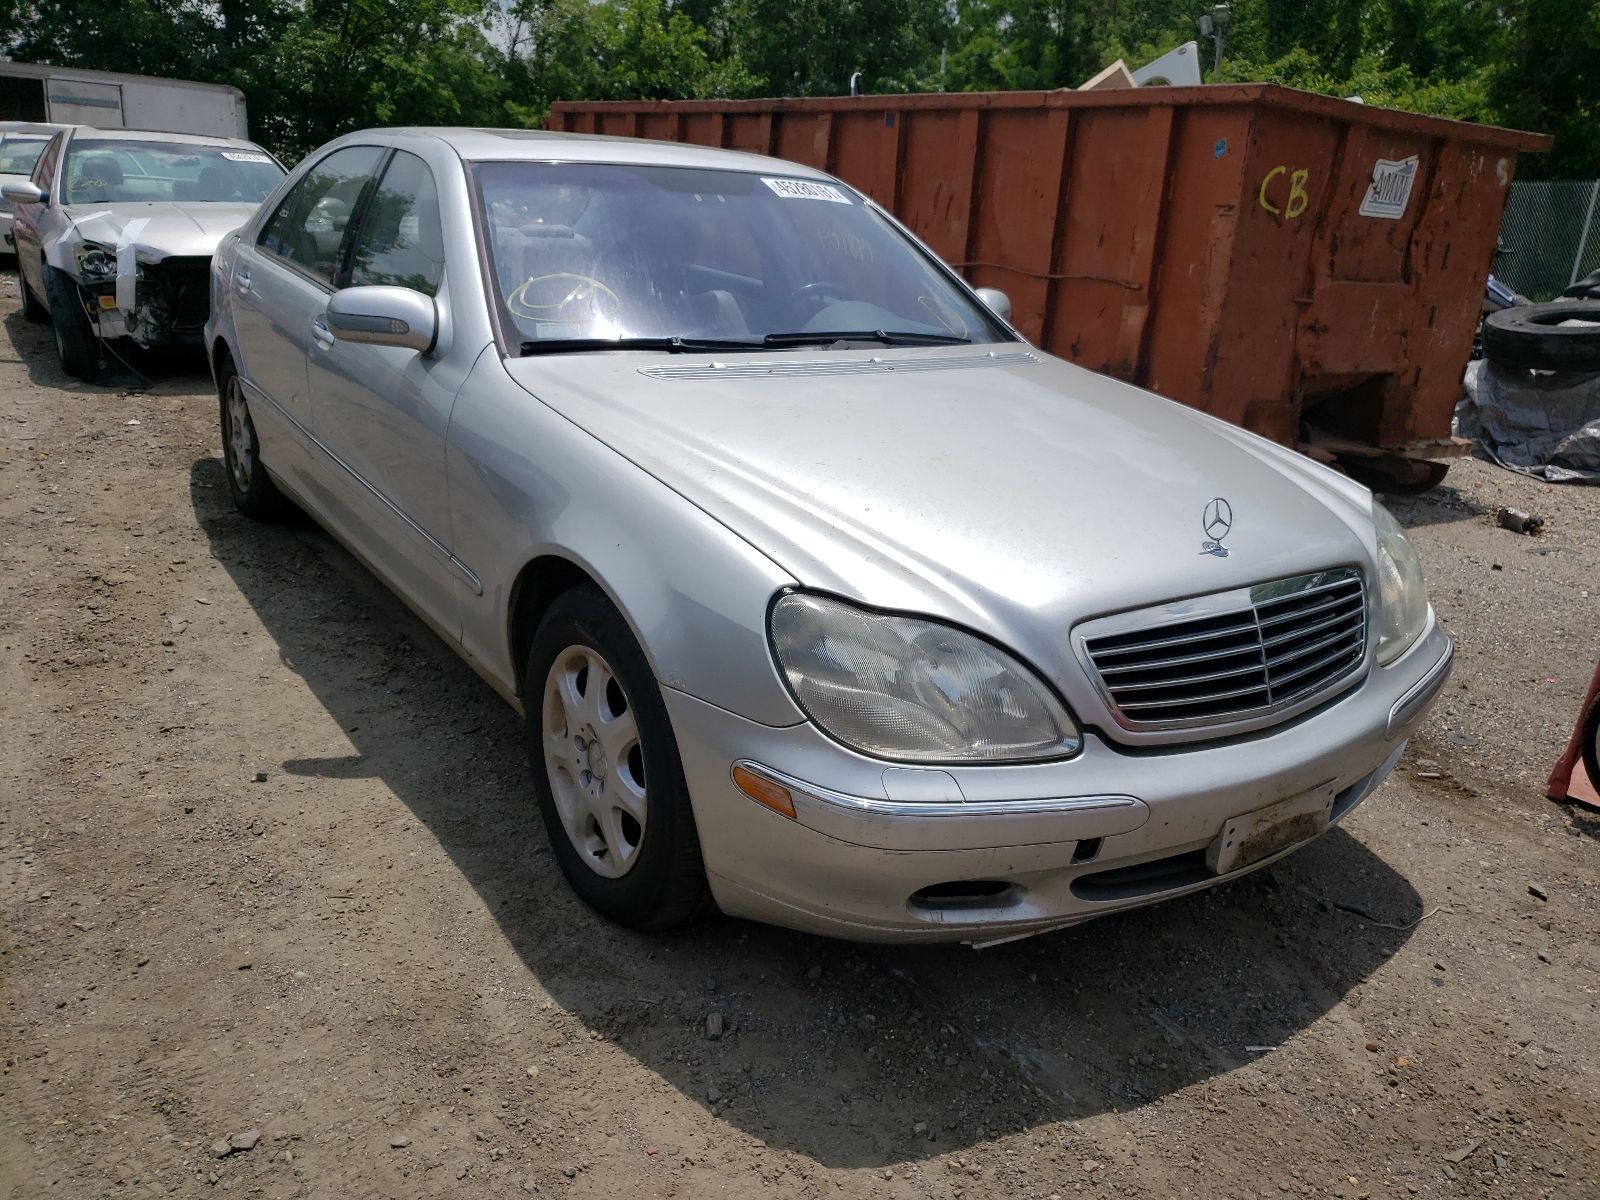 1 of WDBNG75J61A164987 Mercedes-Benz S-Class 2001